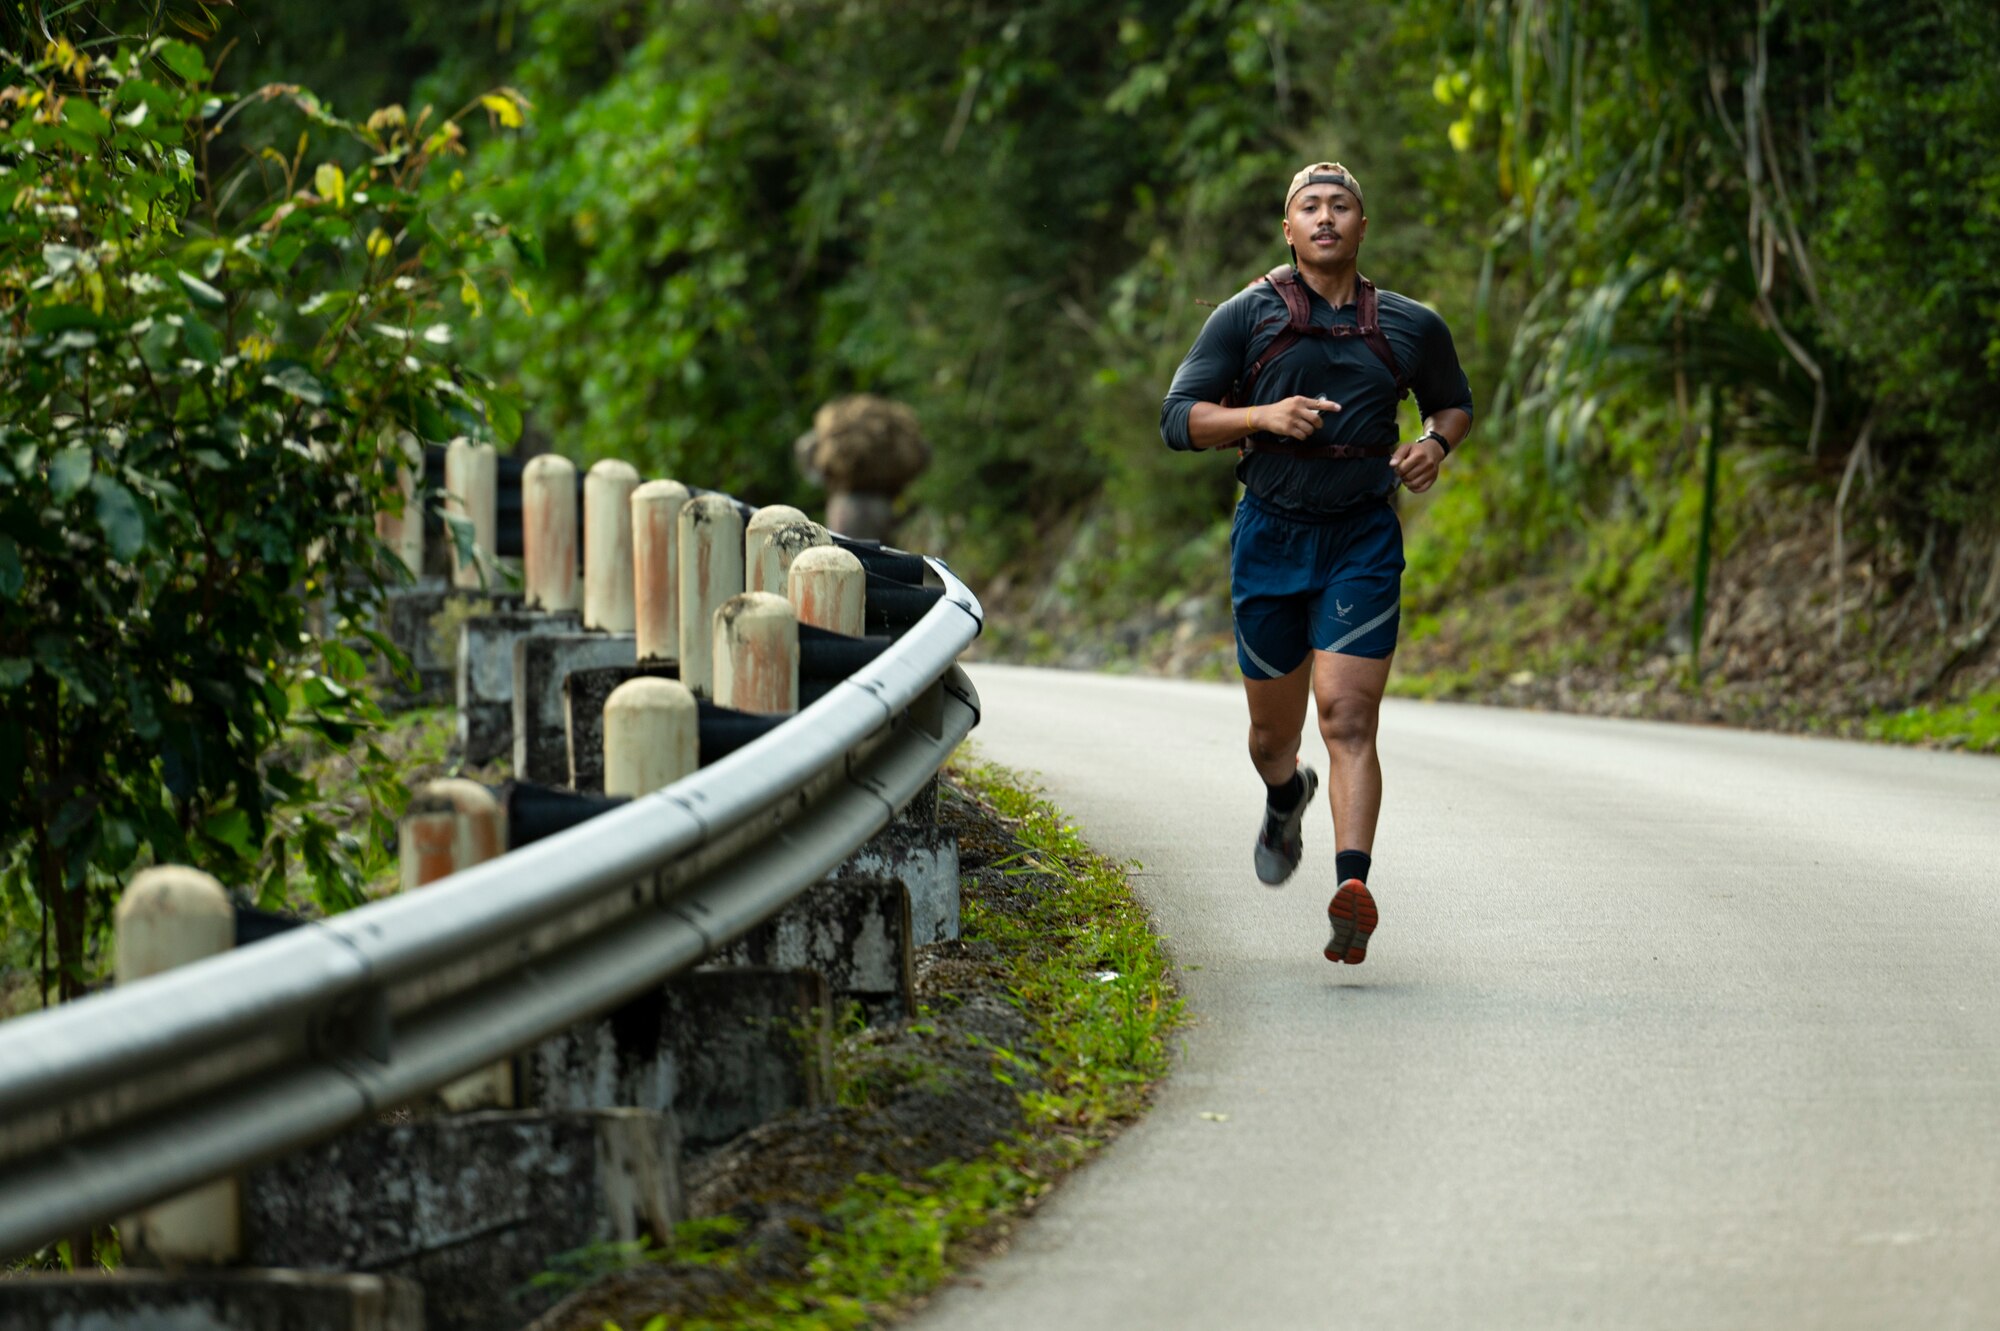 A U.S. Air Force service member runs down Slanders Slope during the Office of Special Investigations’ Hustler-6 memorial event on Andersen Air Force Base, Guam, Dec. 21, 2022. Since 2016, OSI agents assigned to Andersen AFB have annually honored the Hustler-6, who lost their lives during a mission near Bagram, Afghanistan on Dec. 21, 2015, by rucking up and down Sanders Slope. (U.S. Air Force photo by Airman Spencer Perkins)